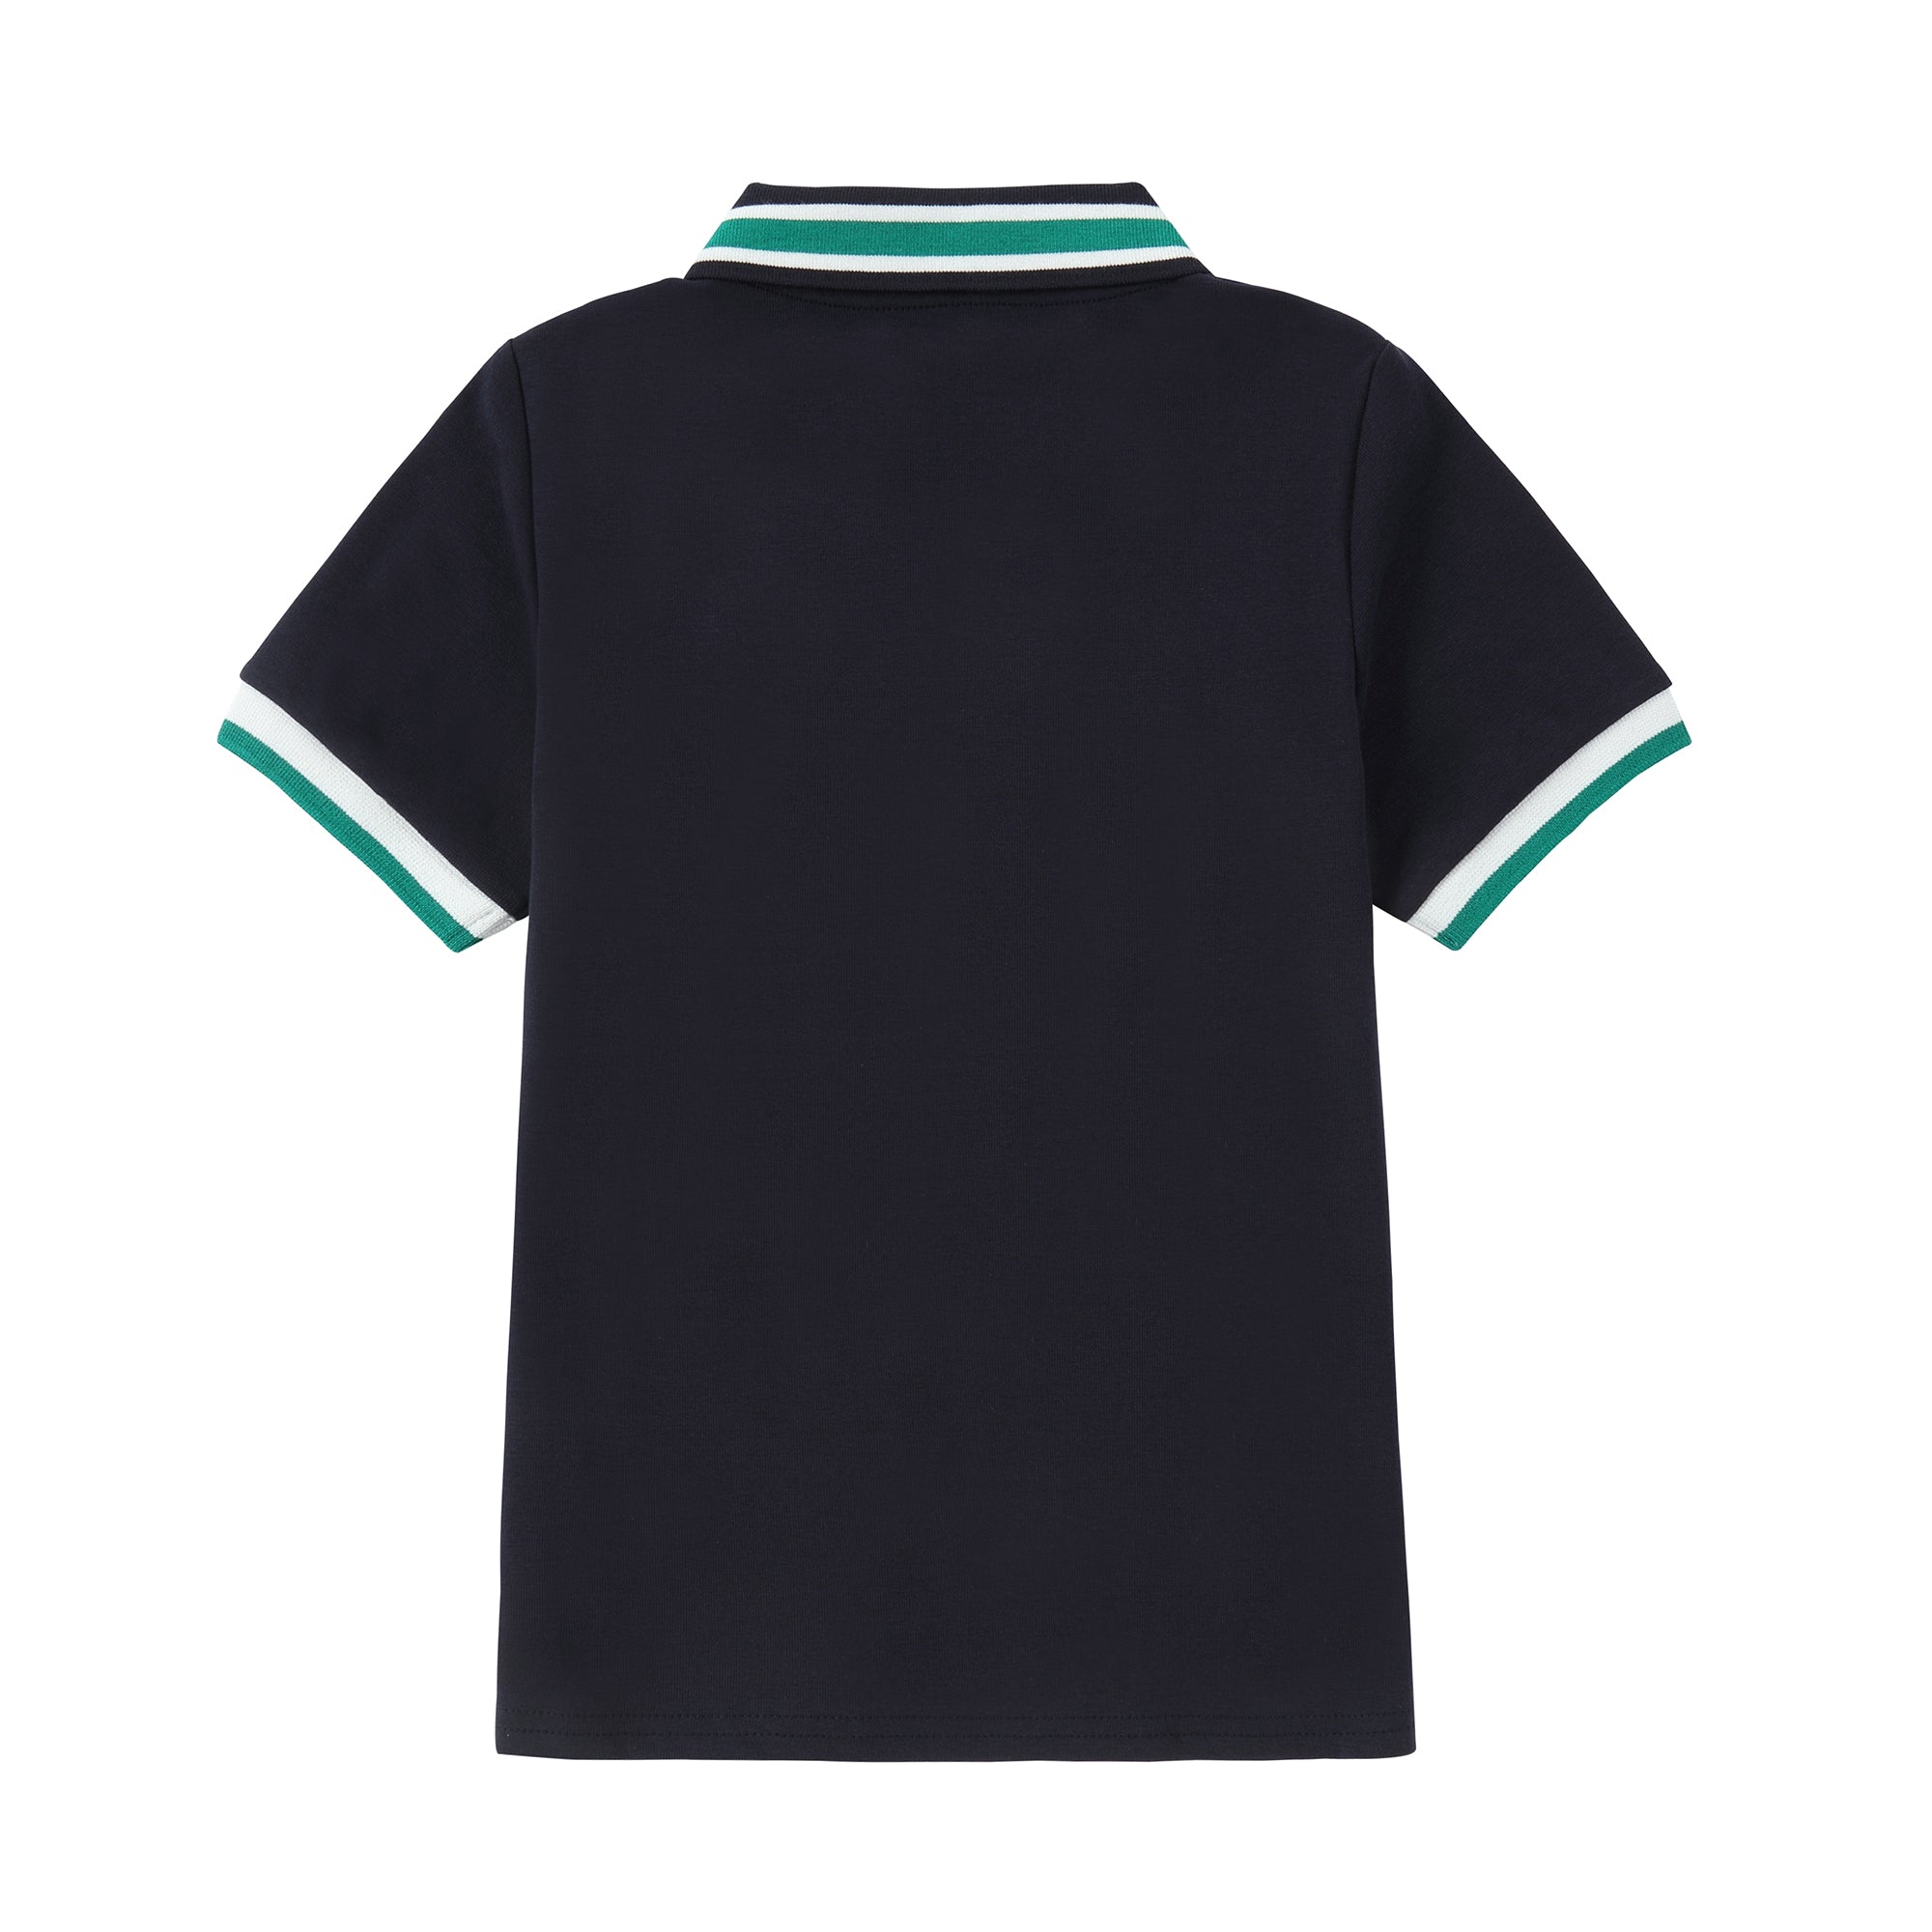 Navy Short Sleeve Polo With Tennis Patch